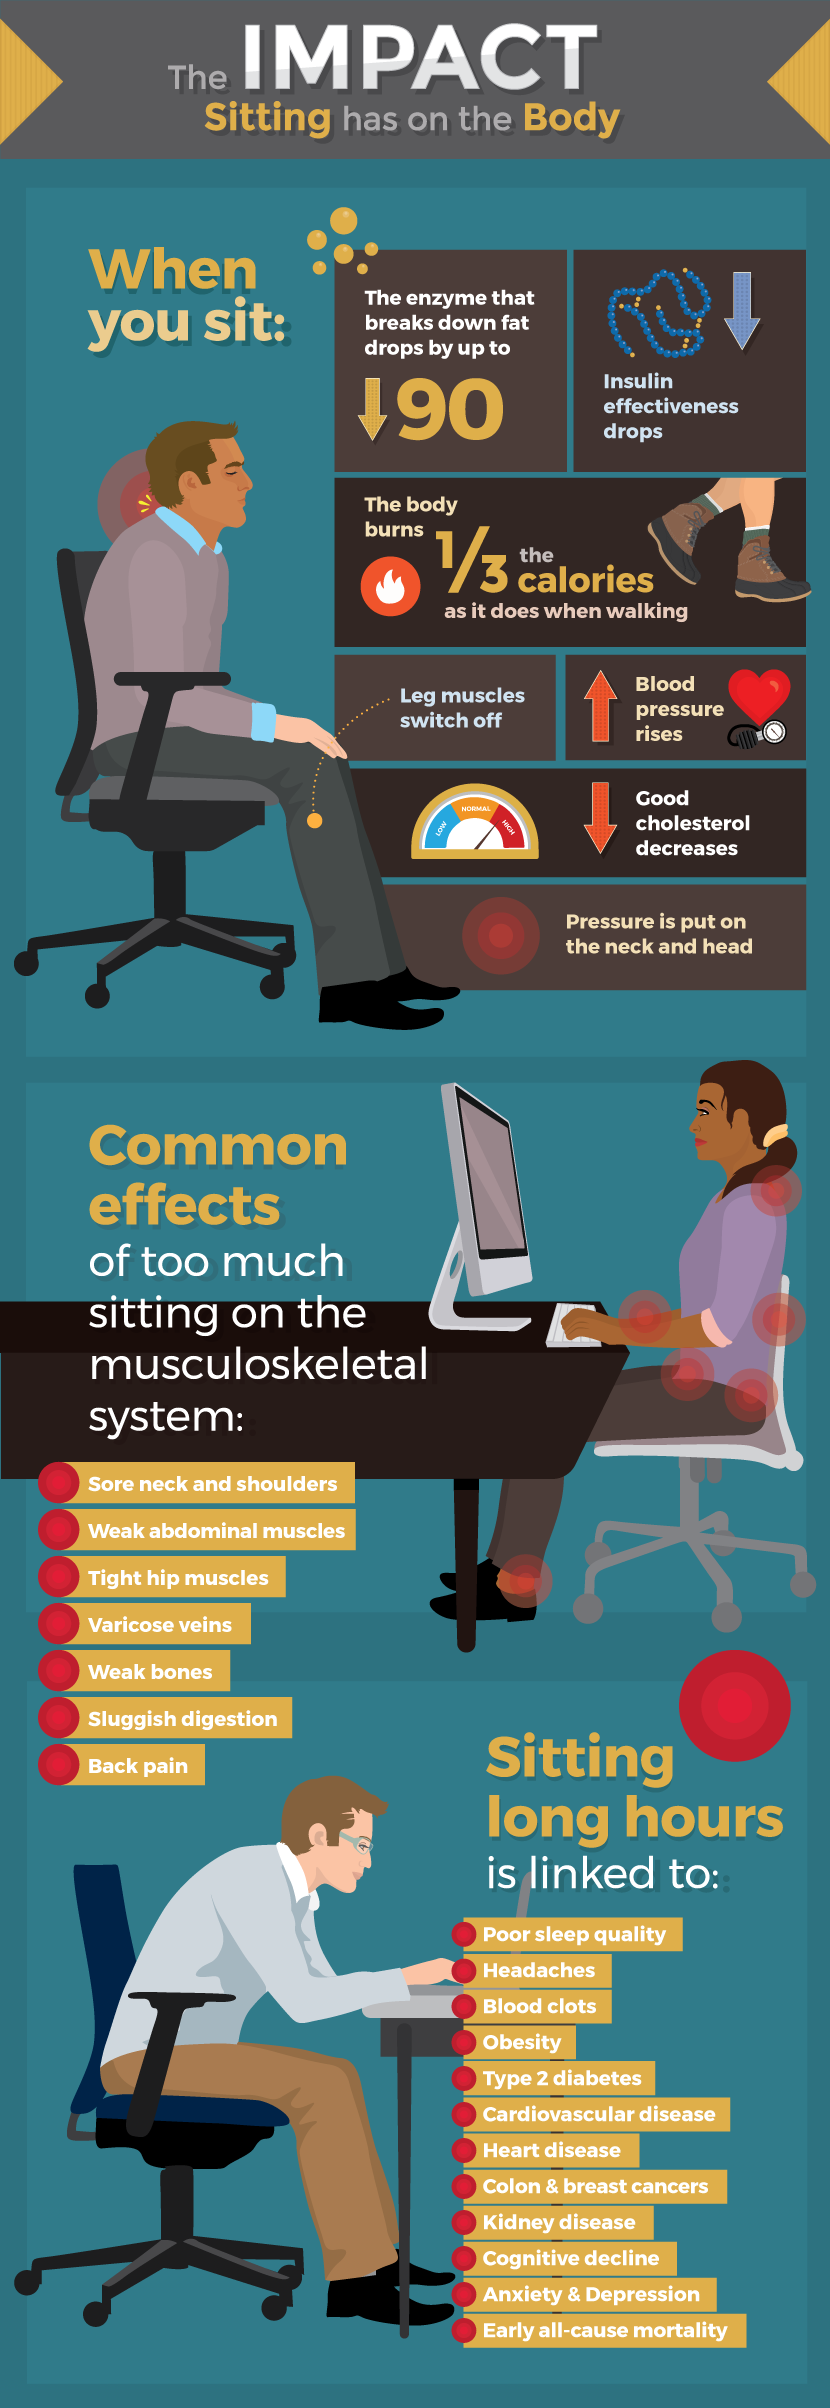 Impact of Sitting on the Body - Take a Stand Against Sitting